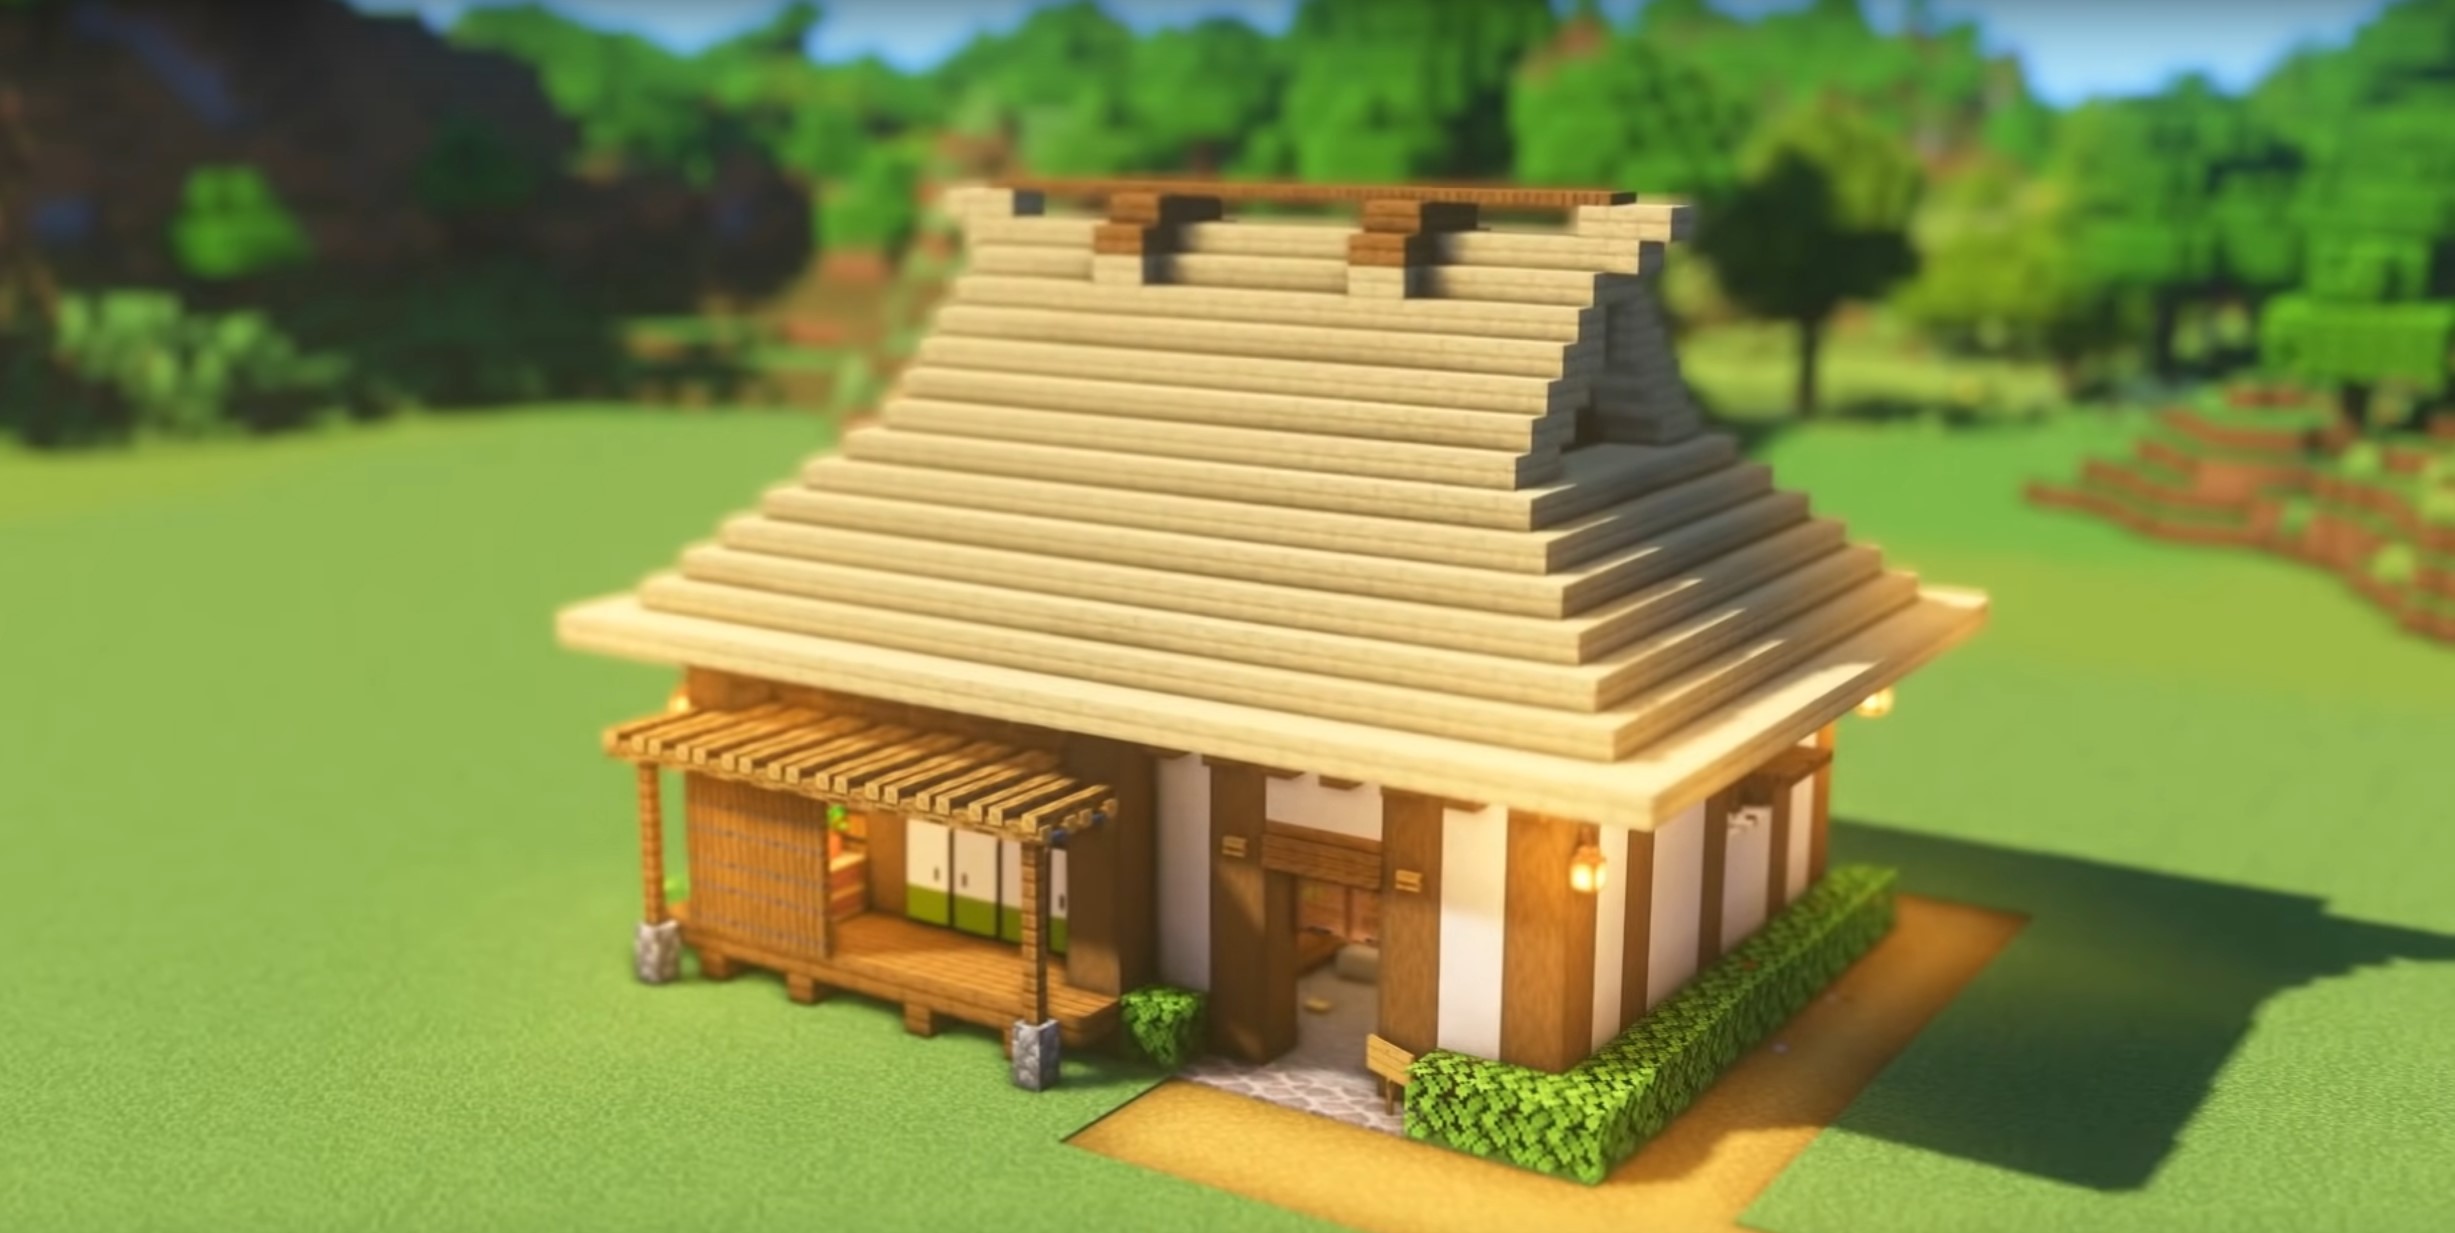 Japanese-style thatched roof house minecraft building idea